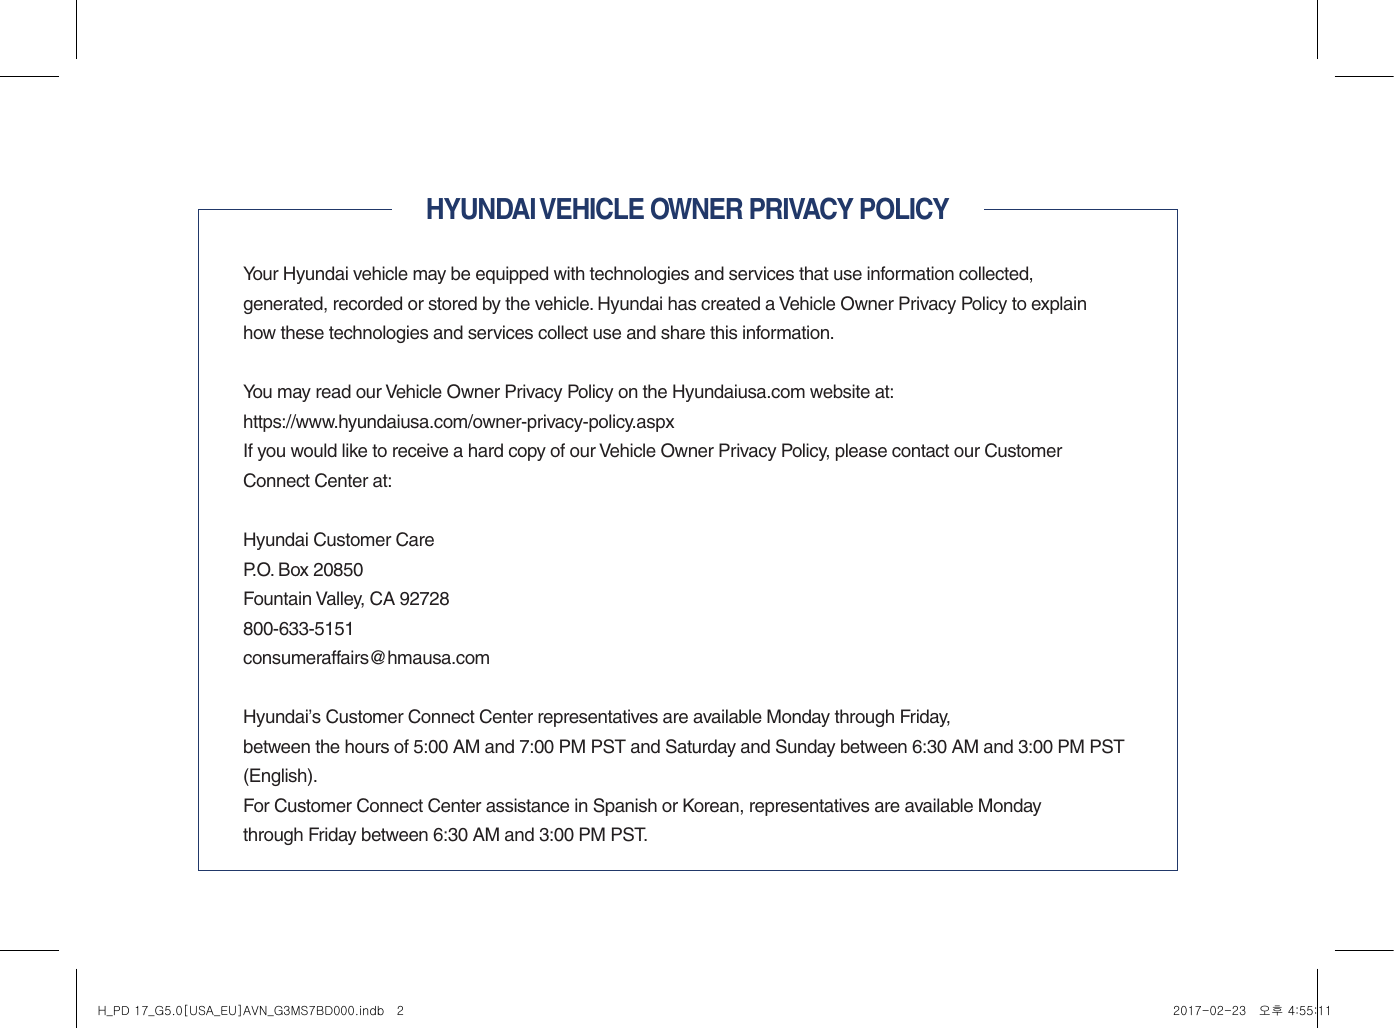 HYUNDAI VEHICLE OWNER PRIVACY POLICYYour Hyundai vehicle may be equipped with technologies and services that use information collected,  generated, recorded or stored by the vehicle. Hyundai has created a Vehicle Owner Privacy Policy to explain how these technologies and services collect use and share this information.You may read our Vehicle Owner Privacy Policy on the Hyundaiusa.com website at:https://www.hyundaiusa.com/owner-privacy-policy.aspxIf you would like to receive a hard copy of our Vehicle Owner Privacy Policy, please contact our Customer Connect Center at:Hyundai Customer CareP.O. Box 20850Fountain Valley, CA 92728800-633-5151consumeraffairs@hmausa.comHyundai’s Customer Connect Center representatives are available Monday through Friday,  between the hours of 5:00 AM and 7:00 PM PST and Saturday and Sunday between 6:30 AM and 3:00 PM PST (English).For Customer Connect Center assistance in Spanish or Korean, representatives are available Monday  through Friday between 6:30 AM and 3:00 PM PST.H_PD 17_G5.0[USA_EU]AVN_G3MS7BD000.indb   2 2017-02-23   오후 4:55:11